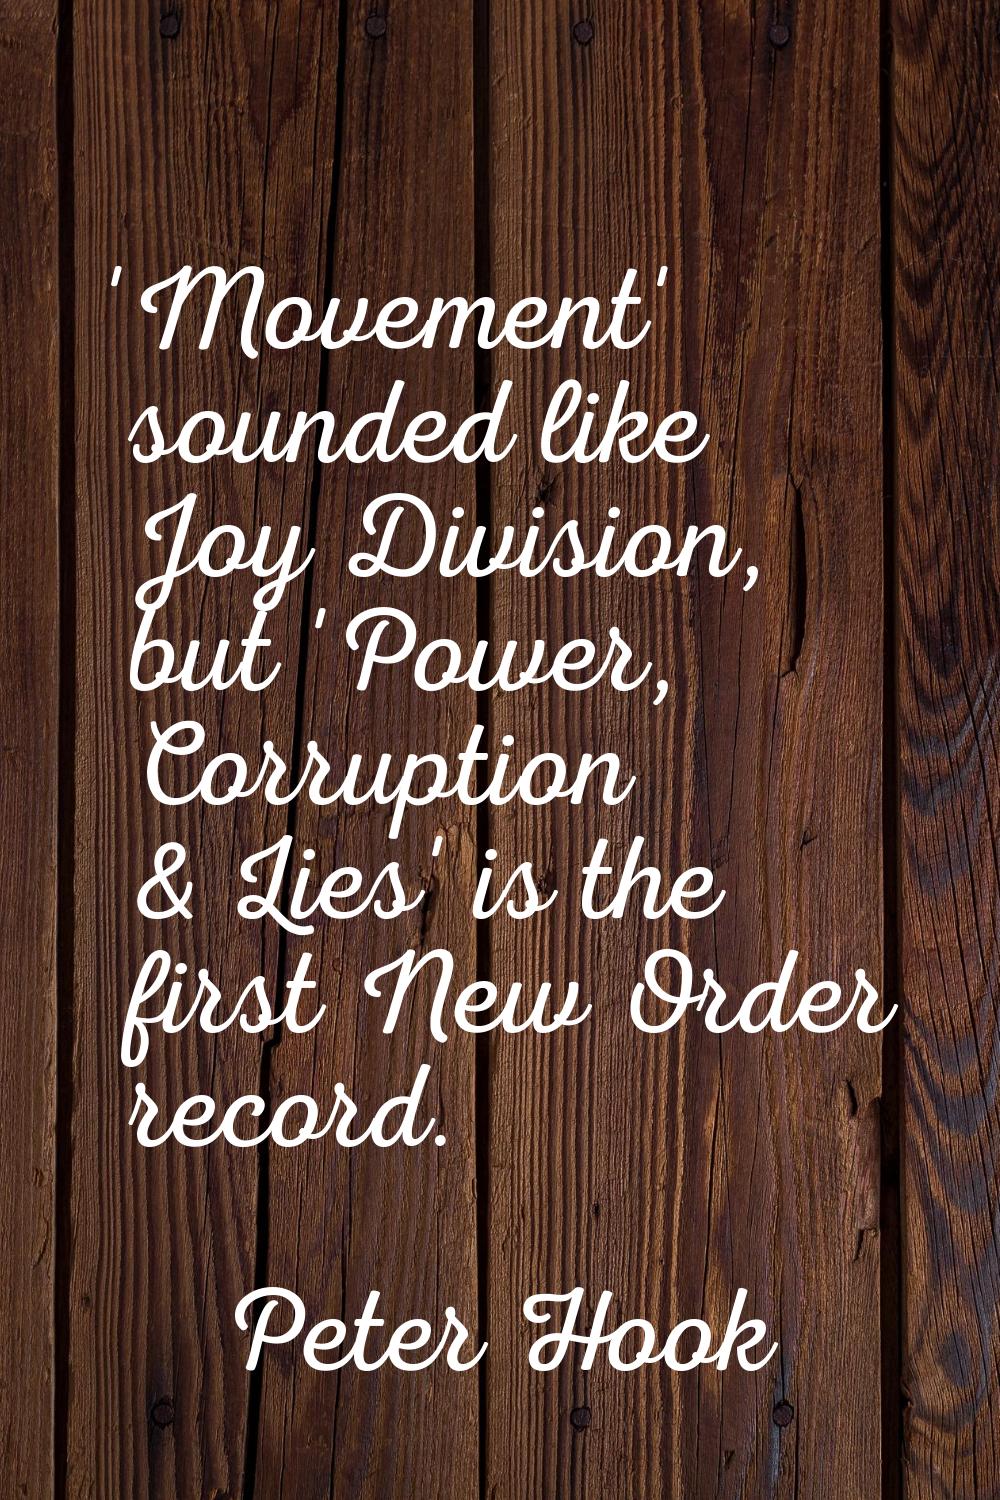 'Movement' sounded like Joy Division, but 'Power, Corruption & Lies' is the first New Order record.